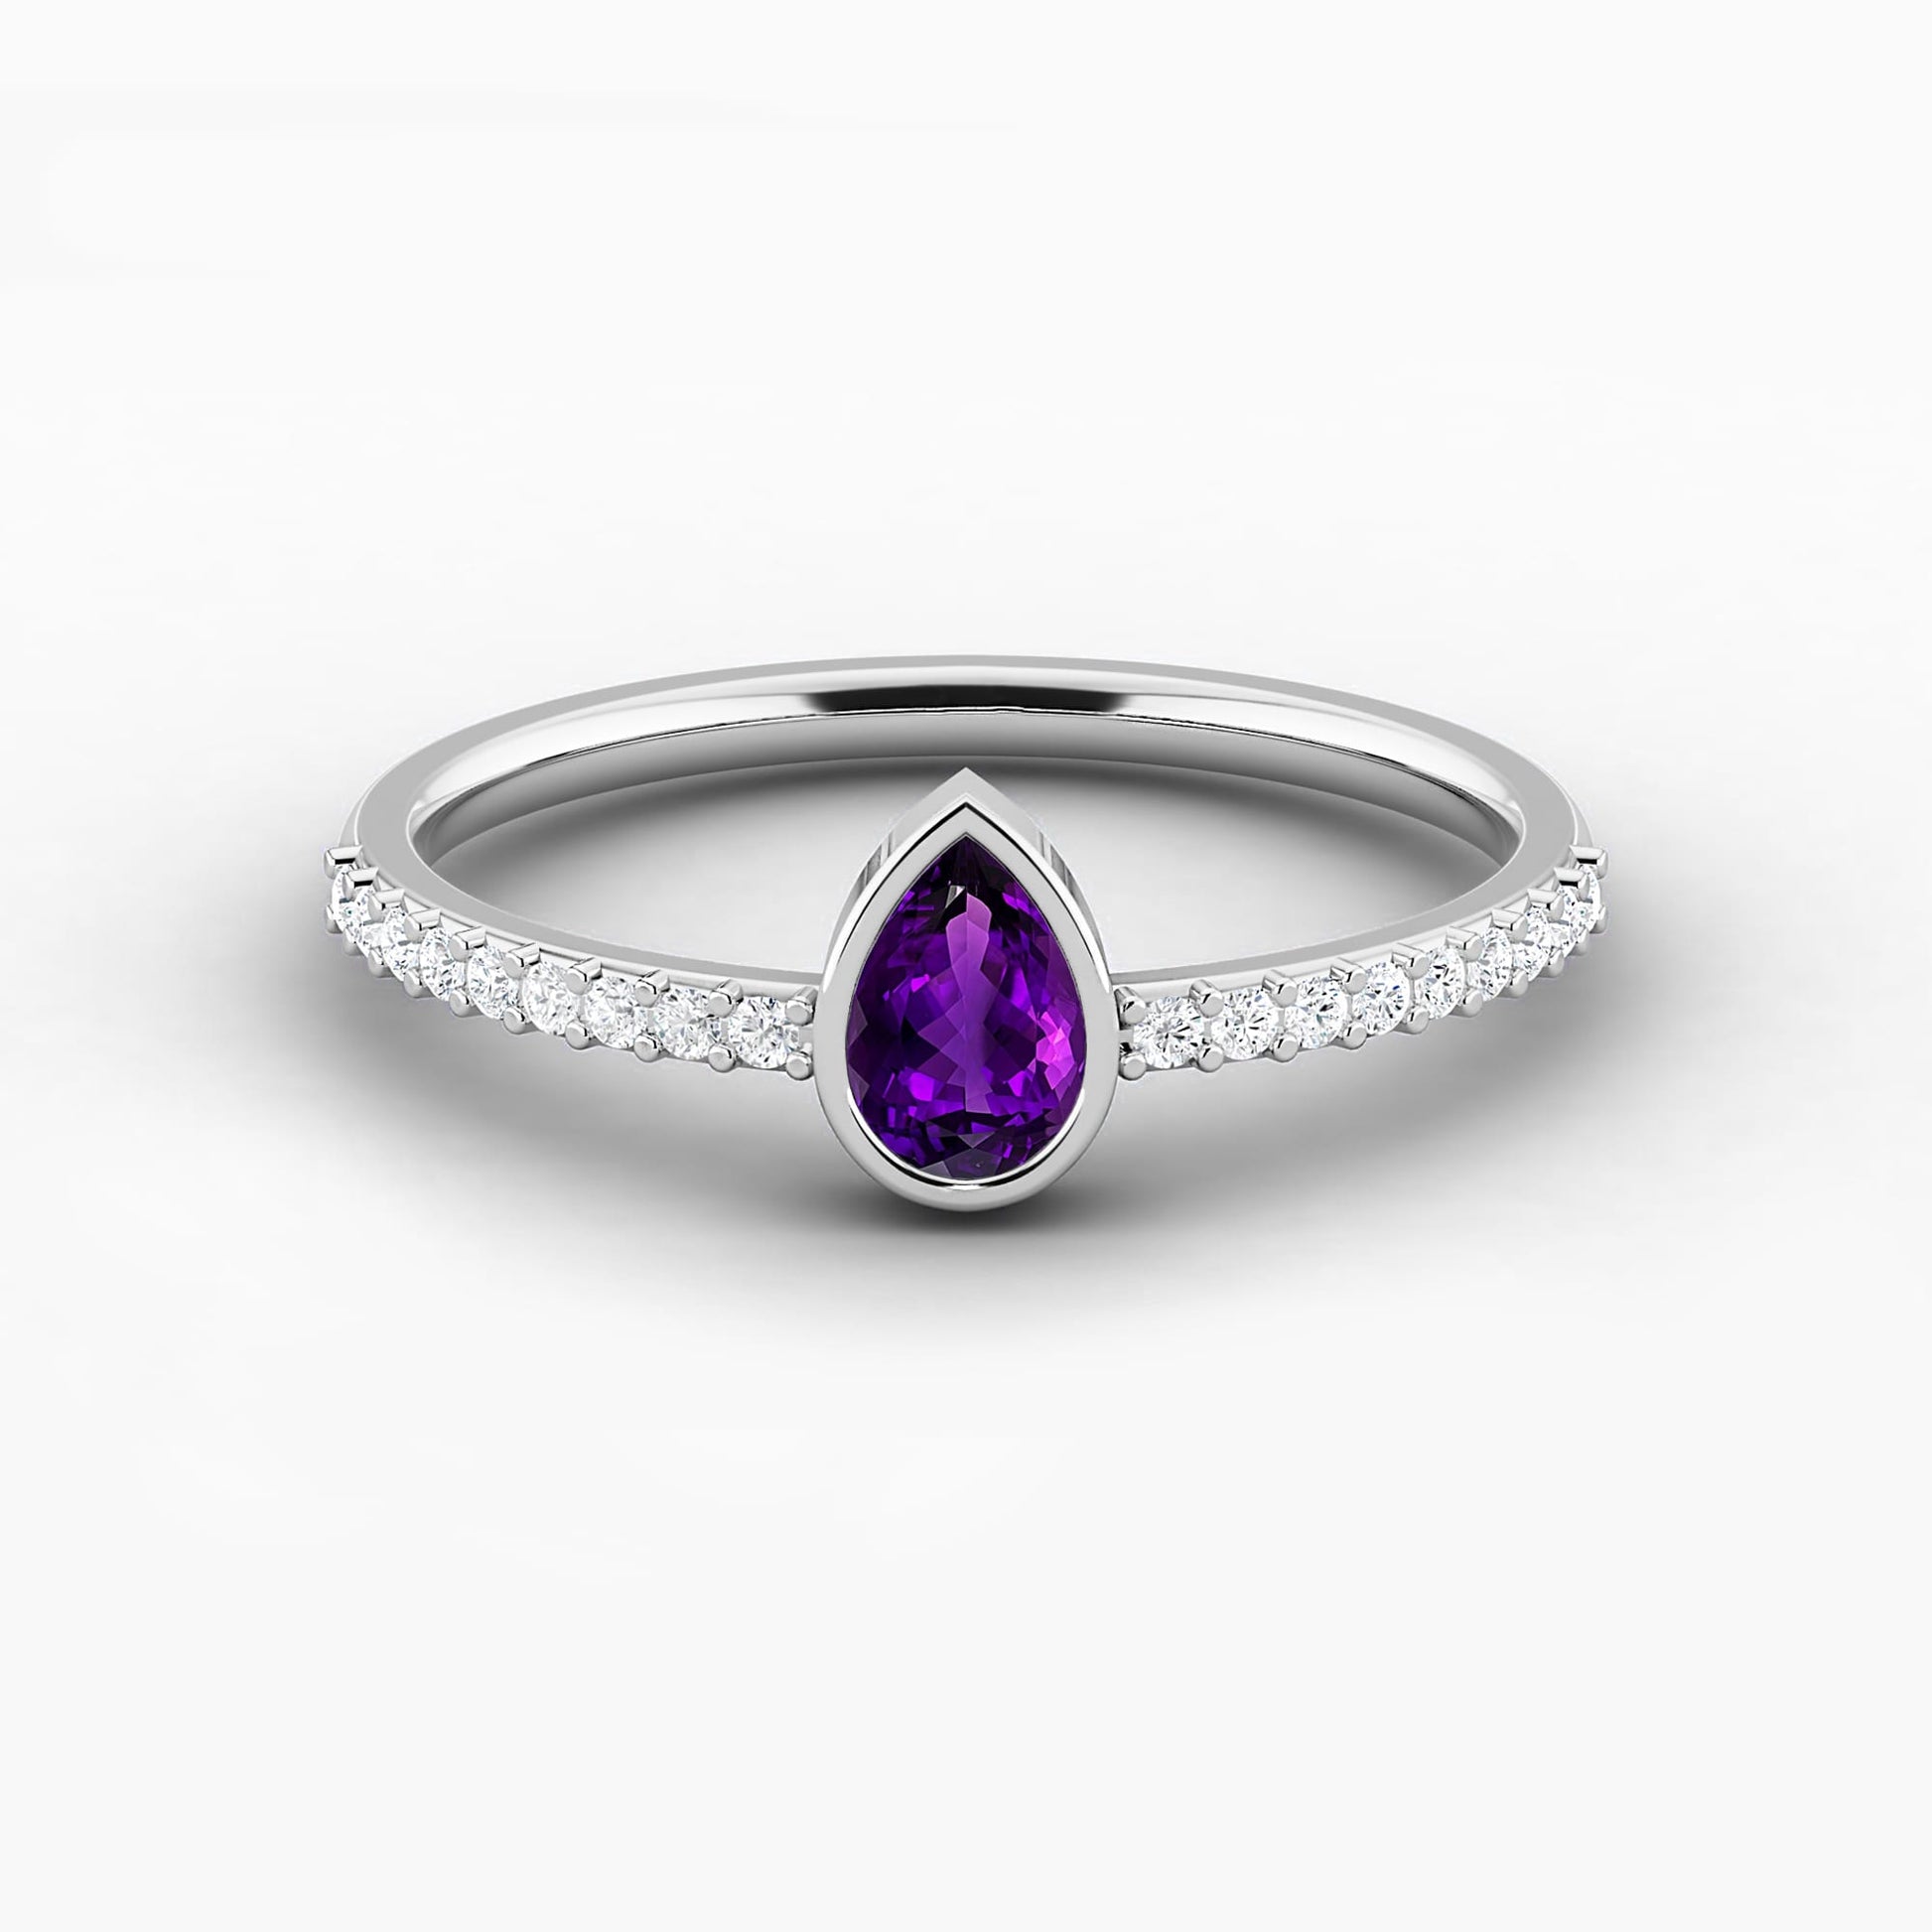 Gemstone Solitaire Engagement Ring